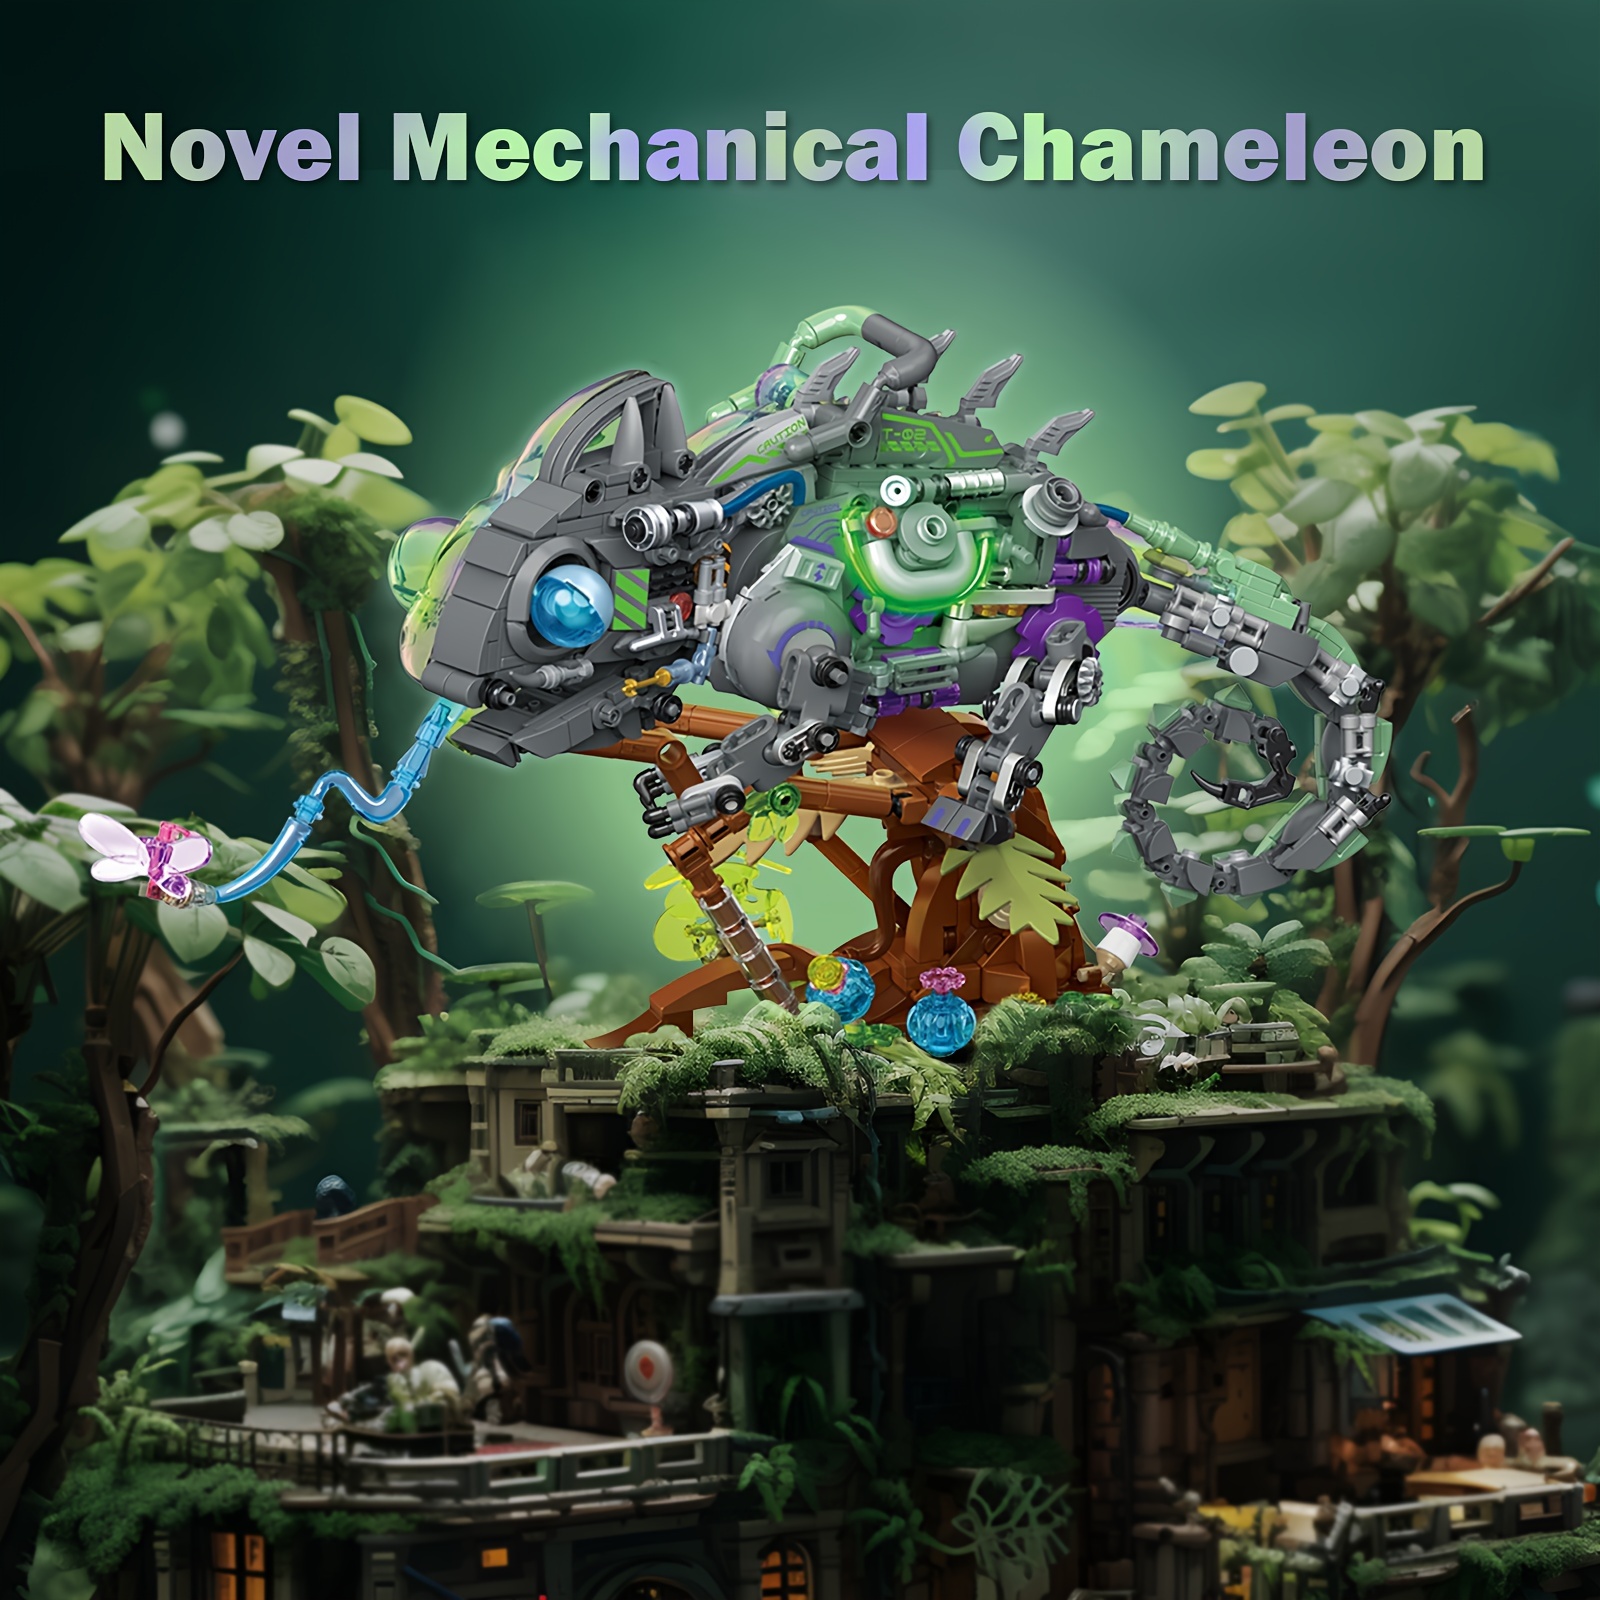 

Jmbricklayer Adult Building Sets Neon Body Mechanical Chameleon 70124, Cool Rainforest Animals Collectible Display Model With Base, Creative Design Building Brick For Adults 14+